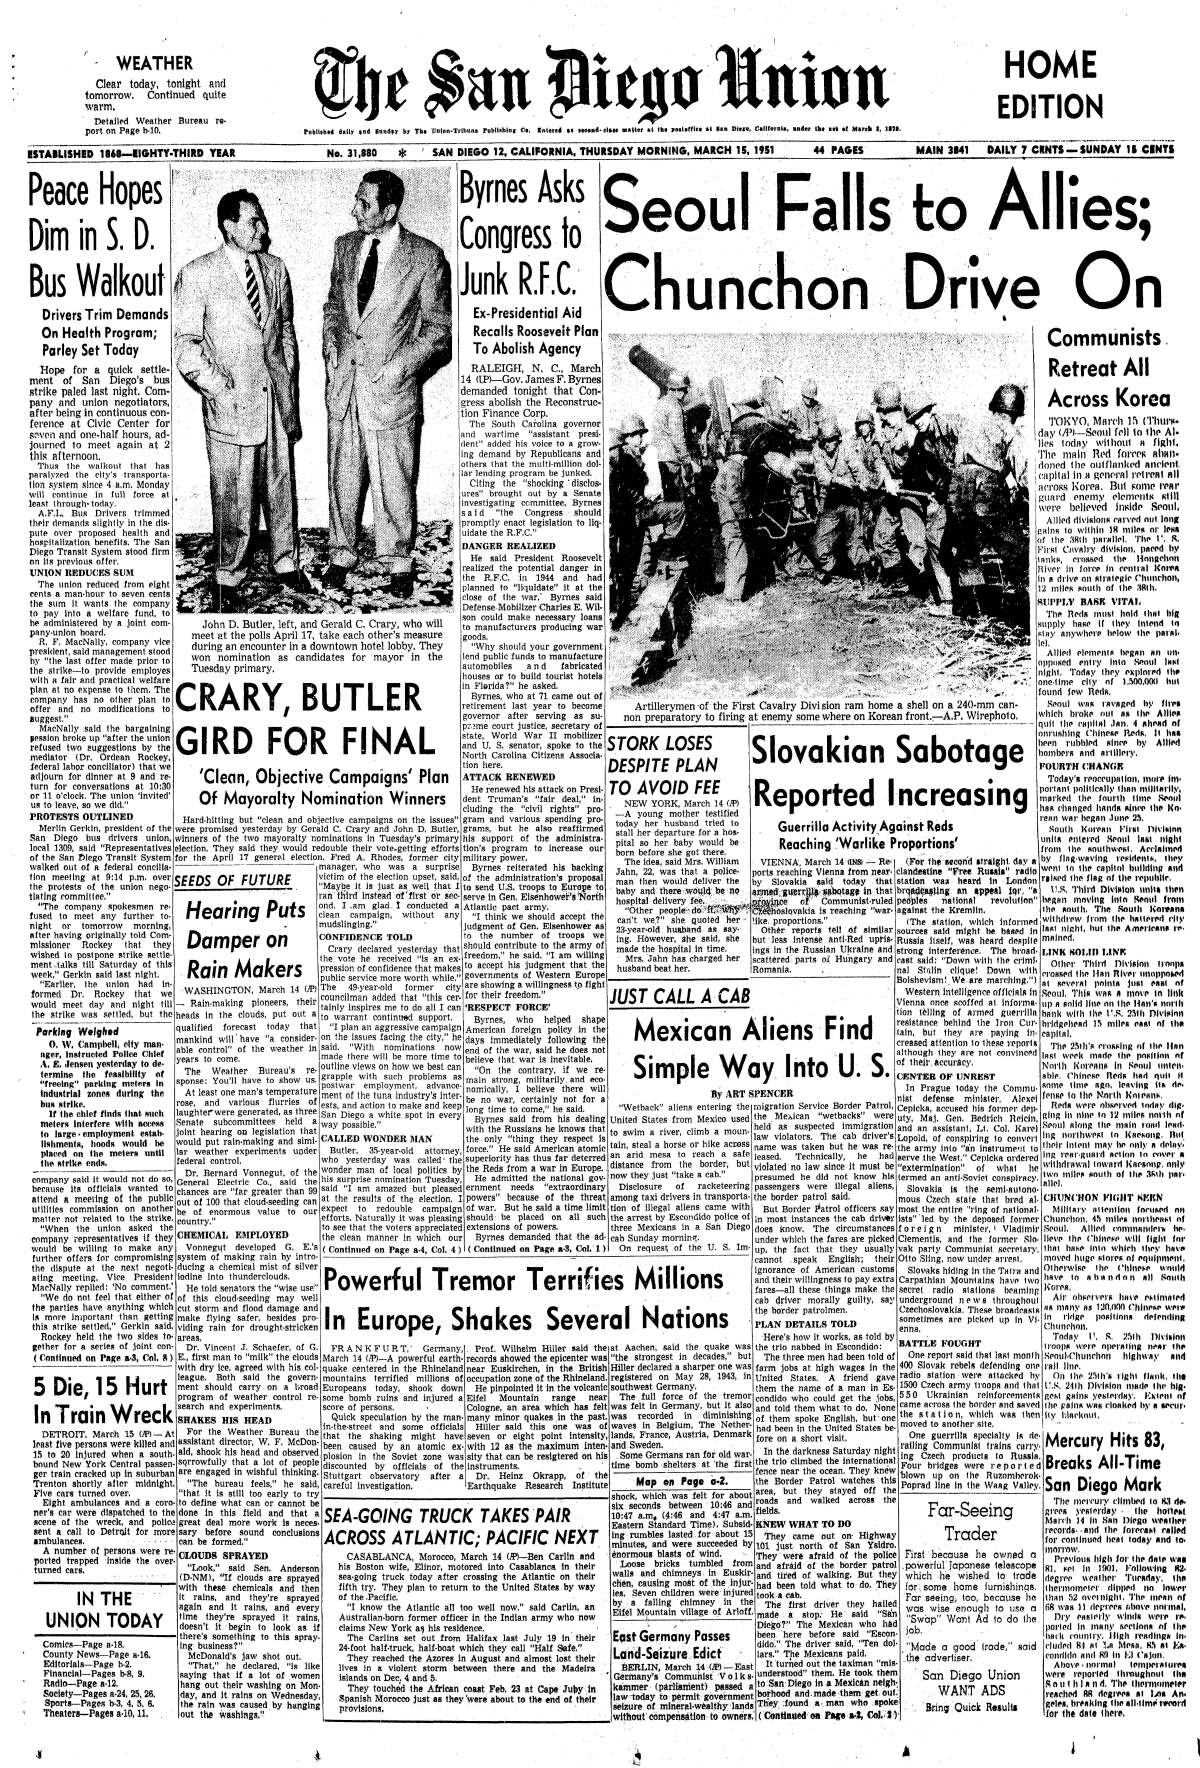 "Seoul Falls to Allies" topped the front page of The San Diego Union on March 15, 1951.